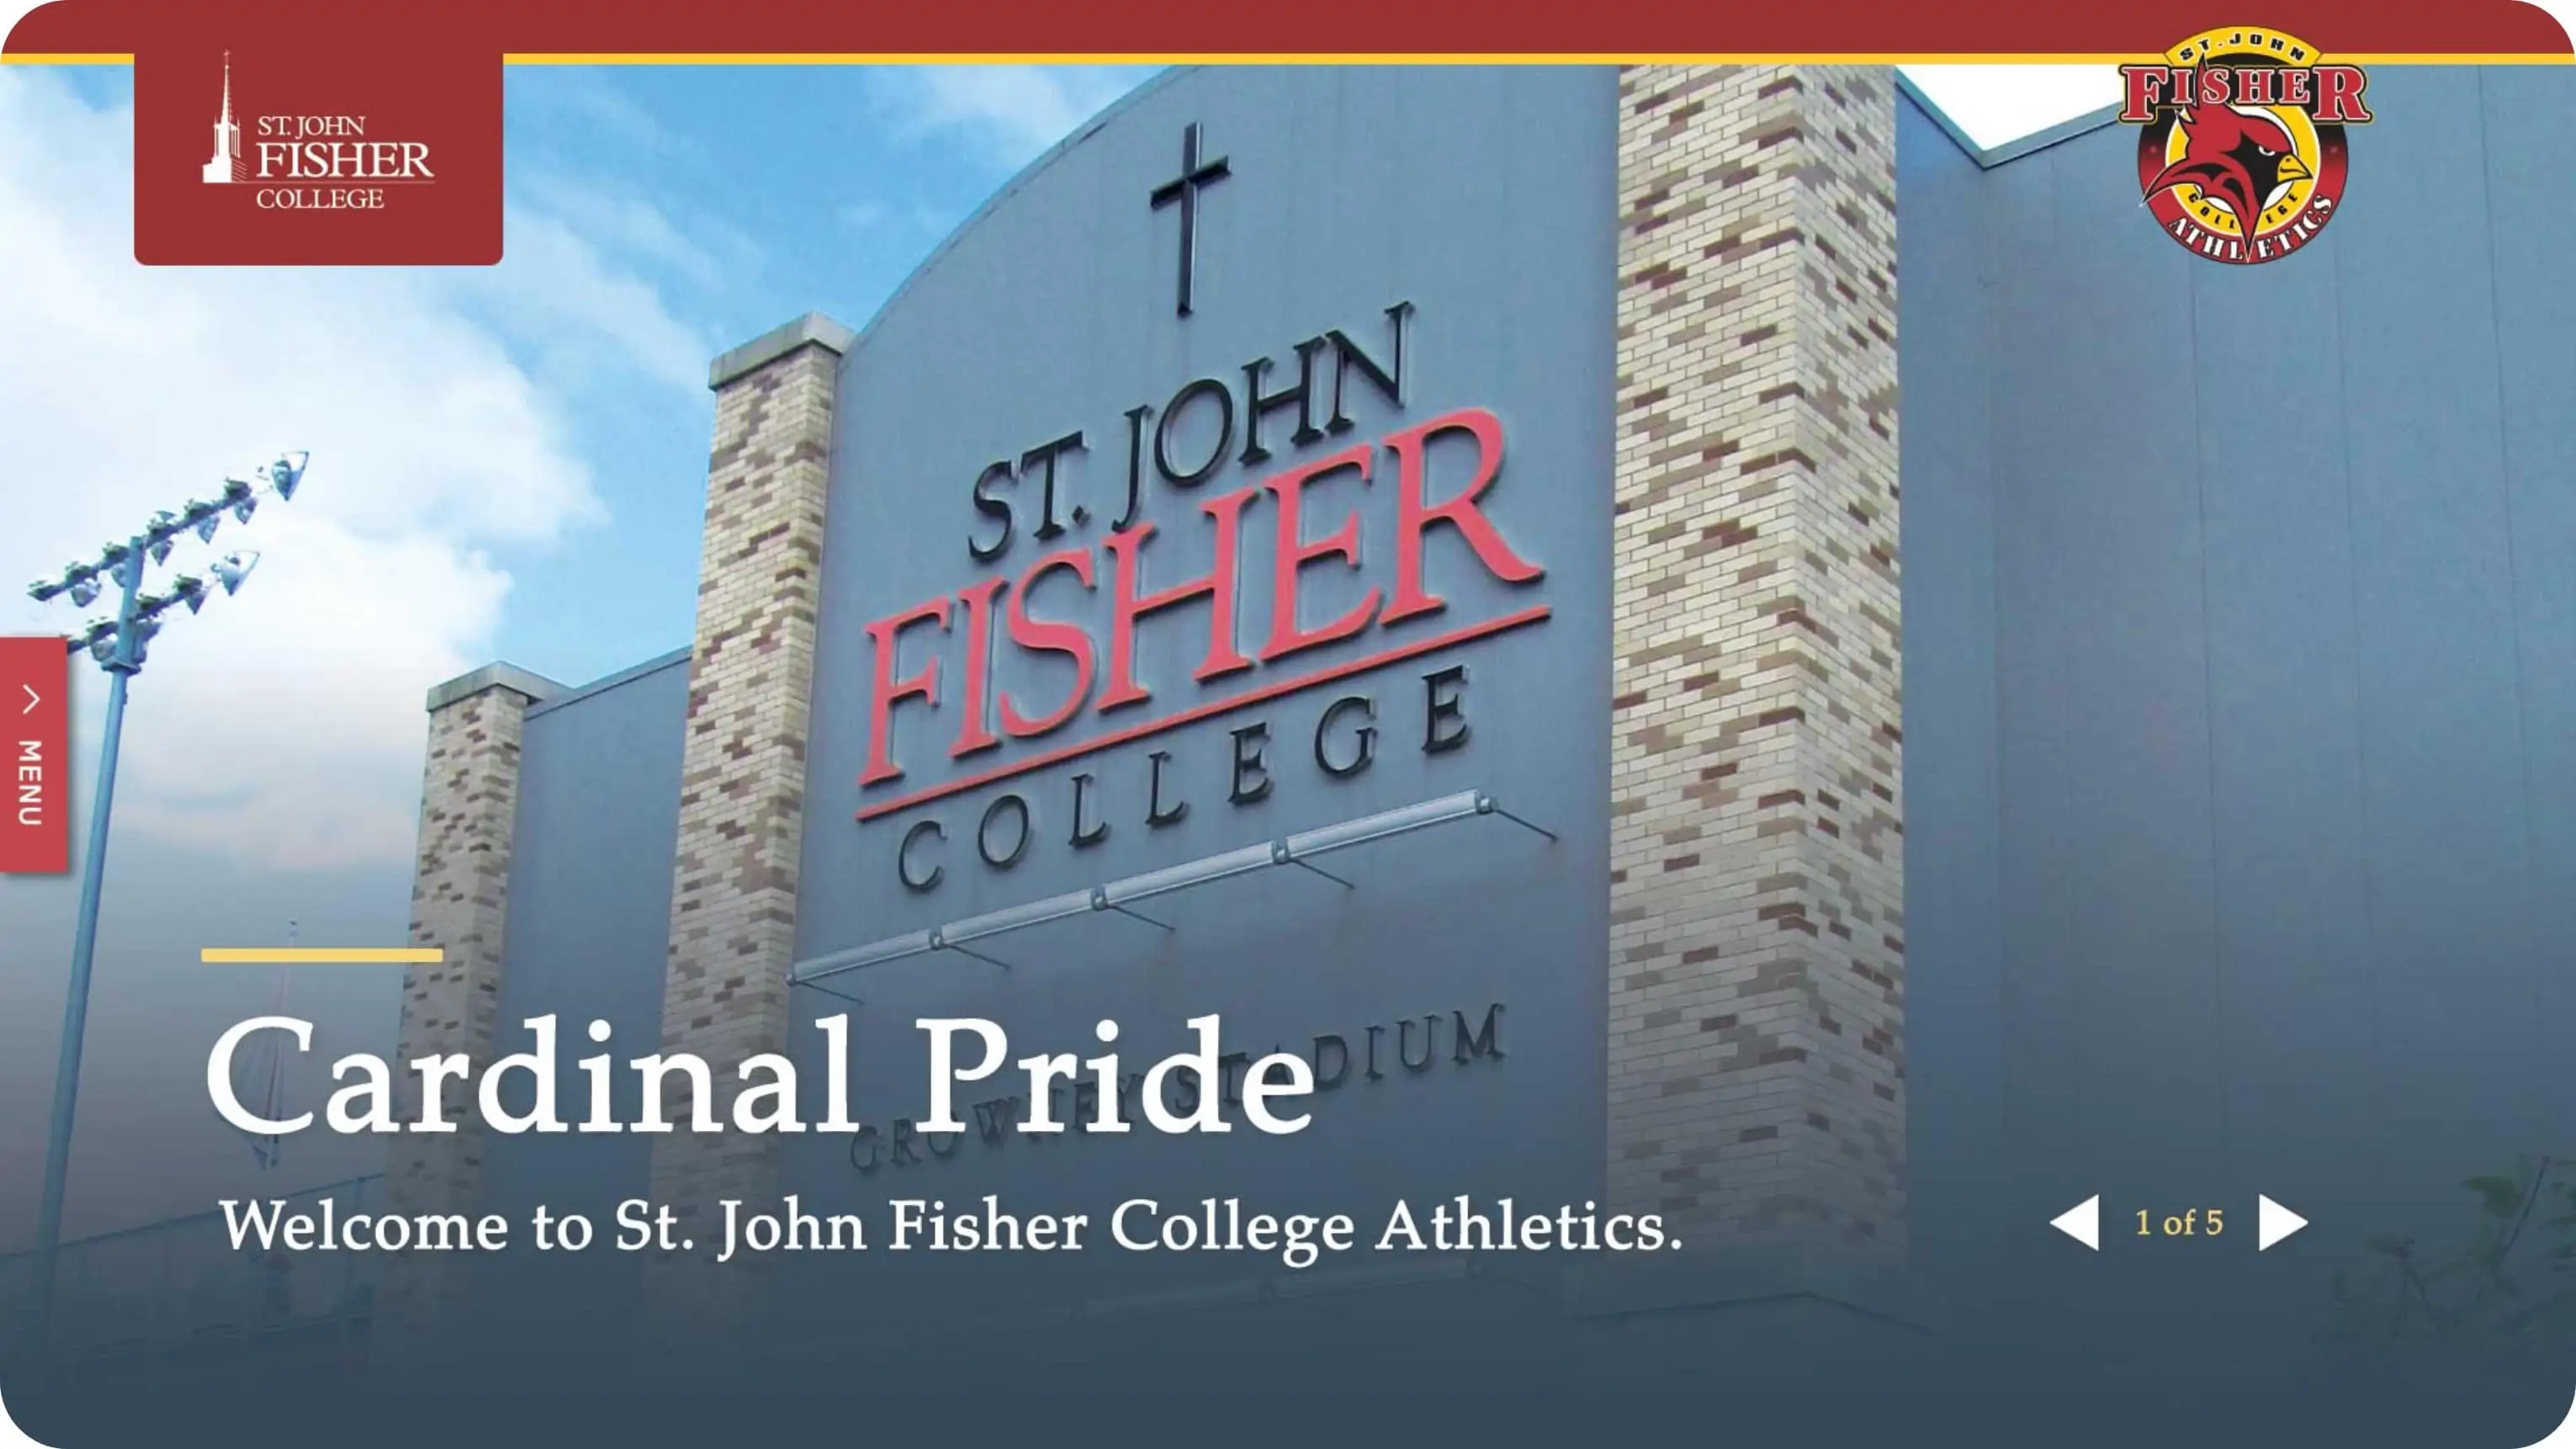 shot of the st. john fisher college home page. there is a background image of the college stadium and text that reads "cardinal pride. welcome to st. john fisher college athletics"